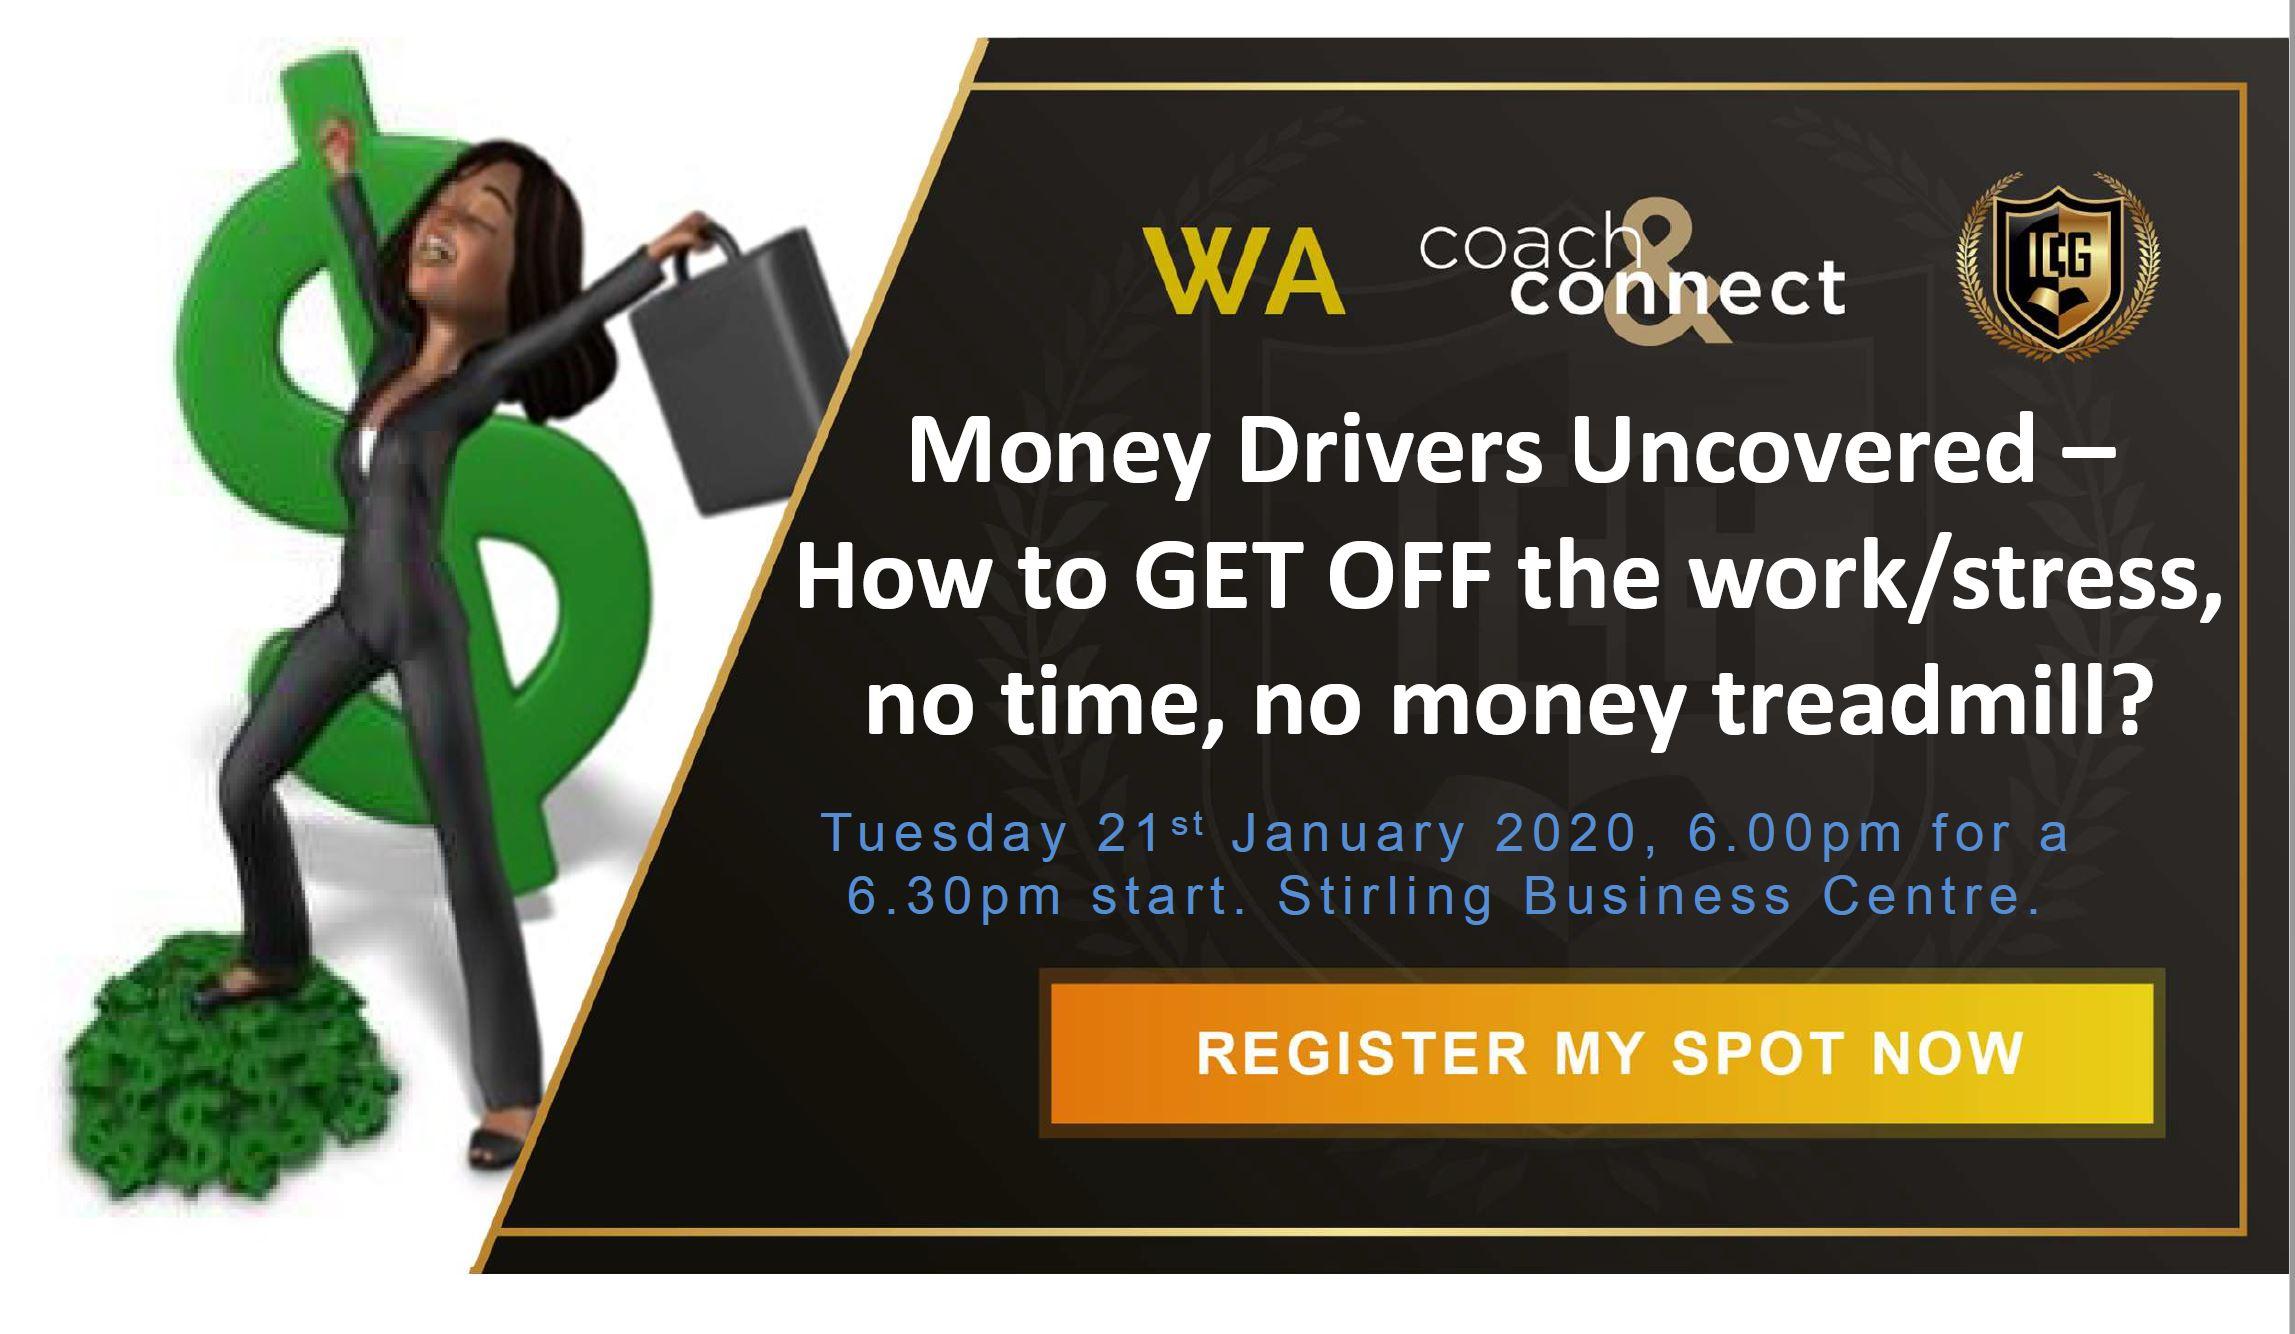 Money Drivers Uncovered... are YOU STUCK on the work/stress, no time, no money treadmill??